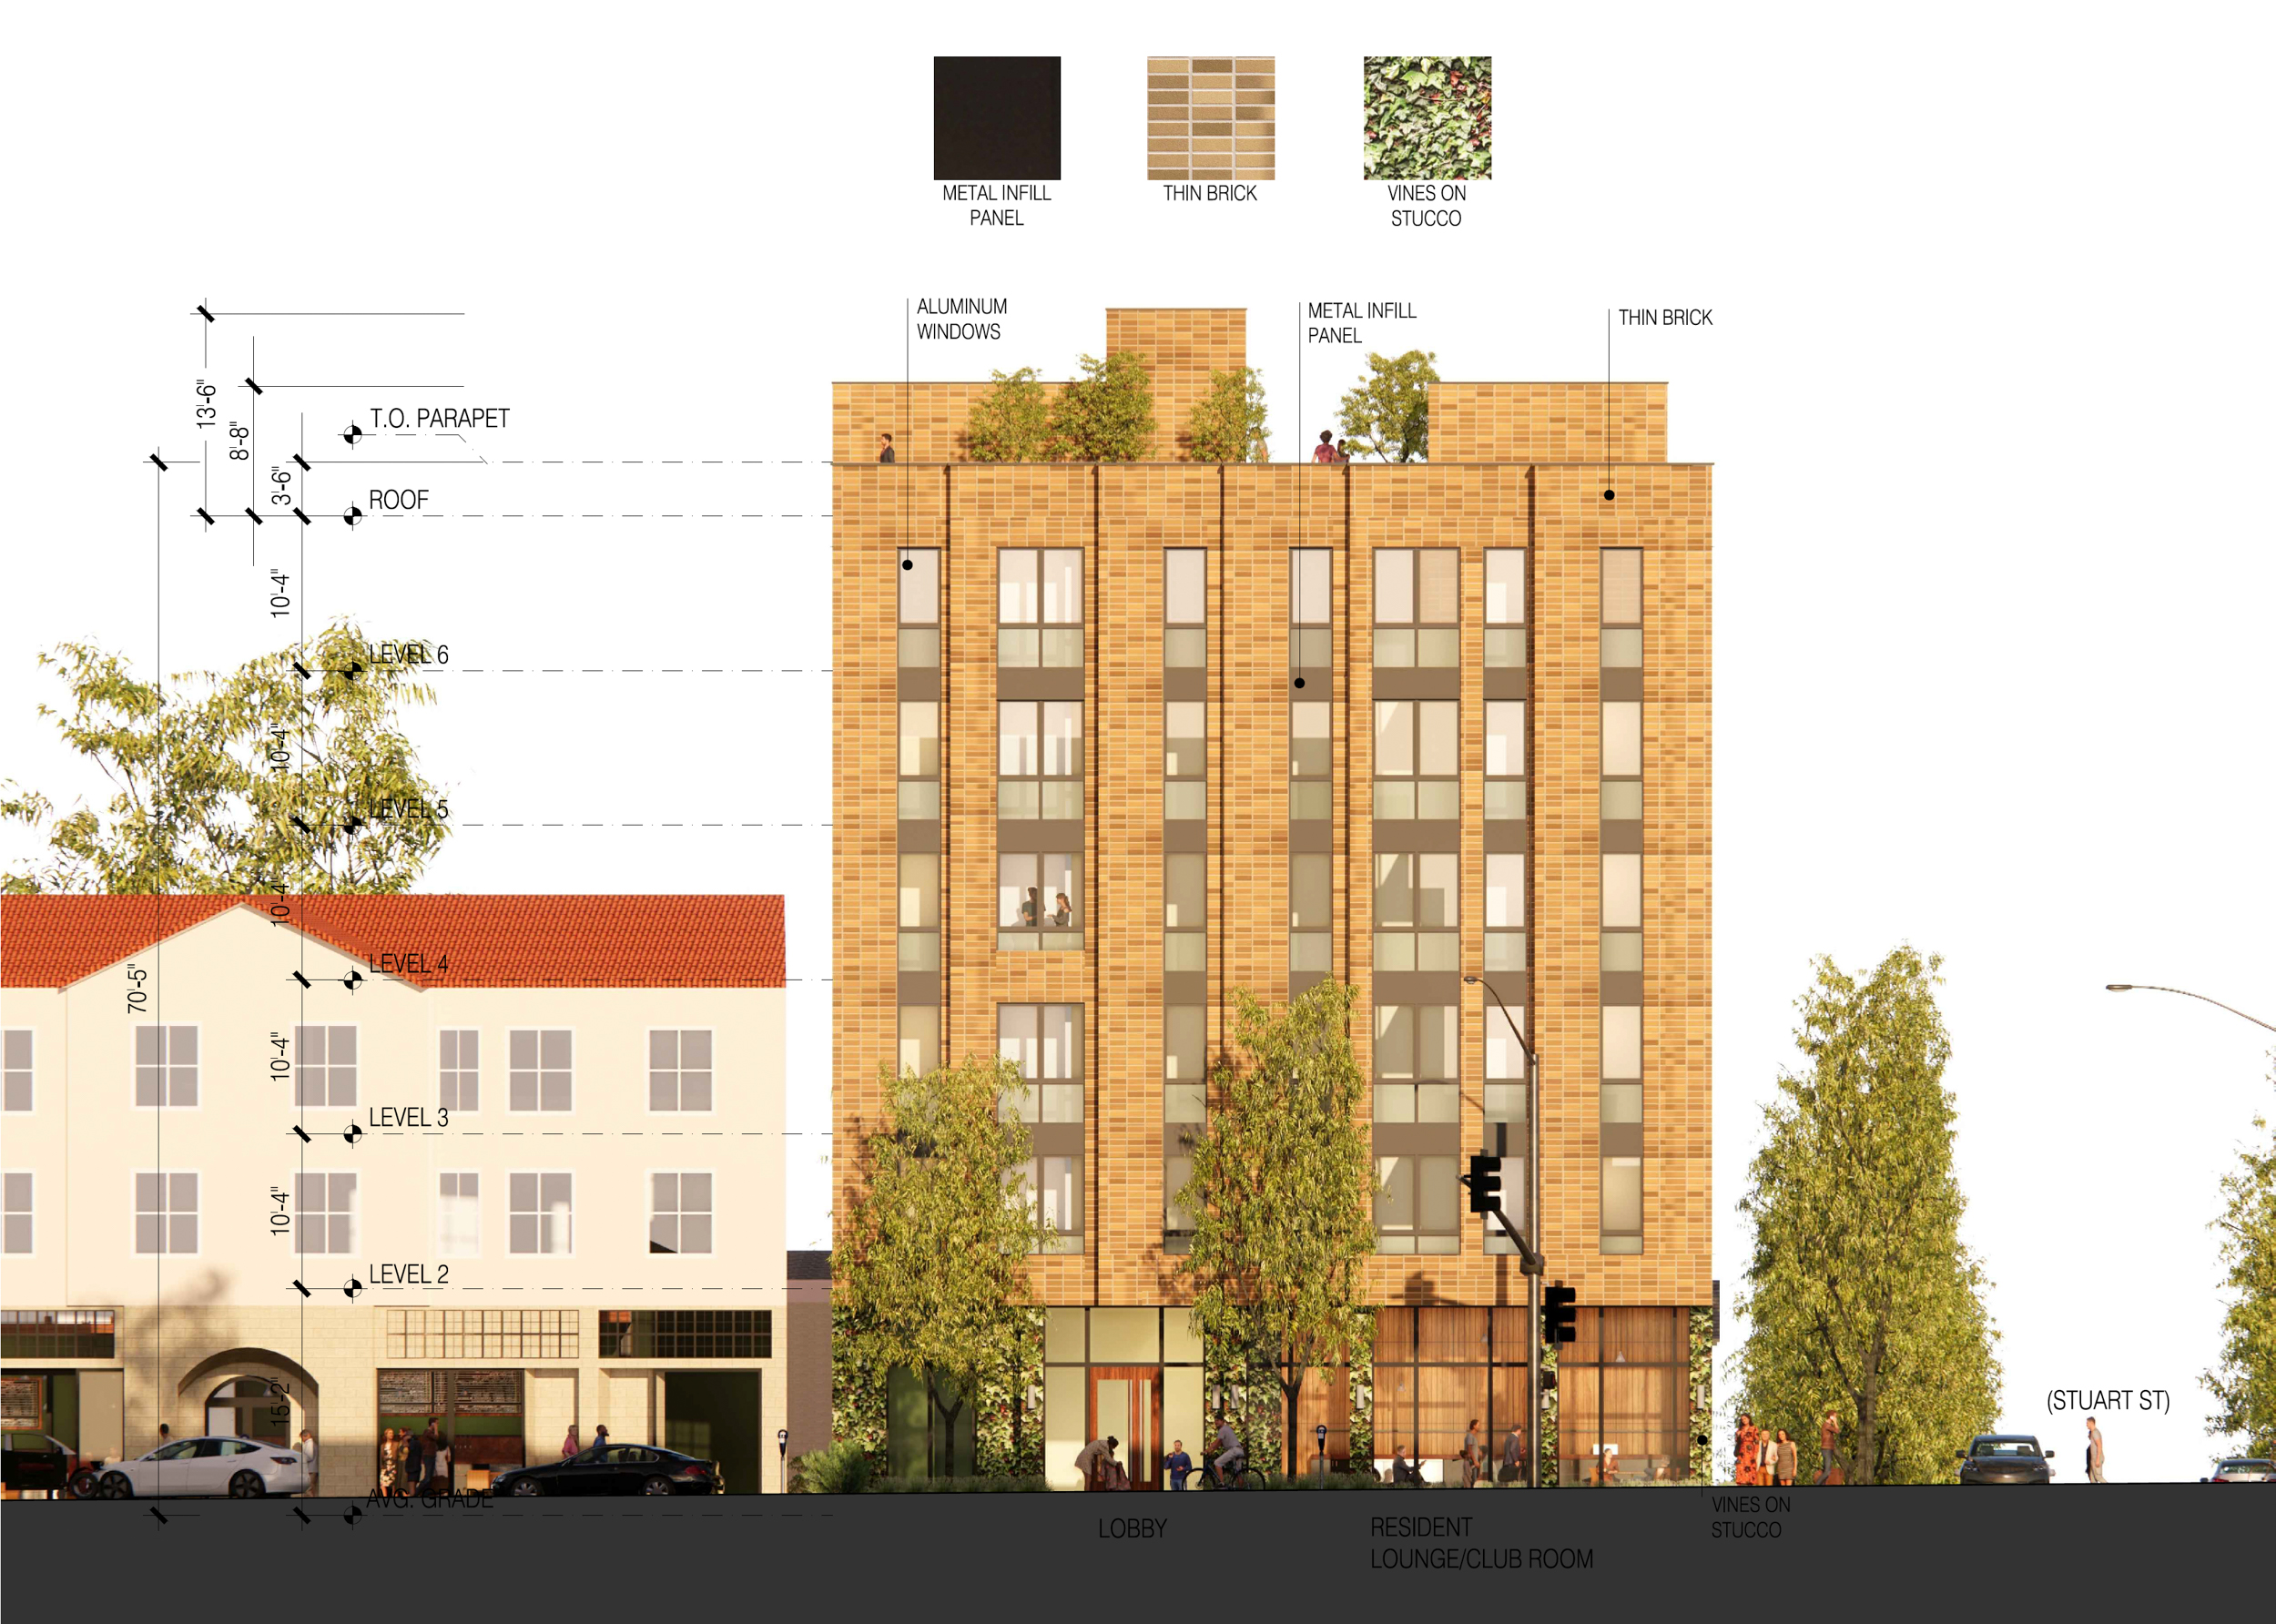 2800 Telegraph Avenue facade elevation, illustration by Trachtenberg Architects